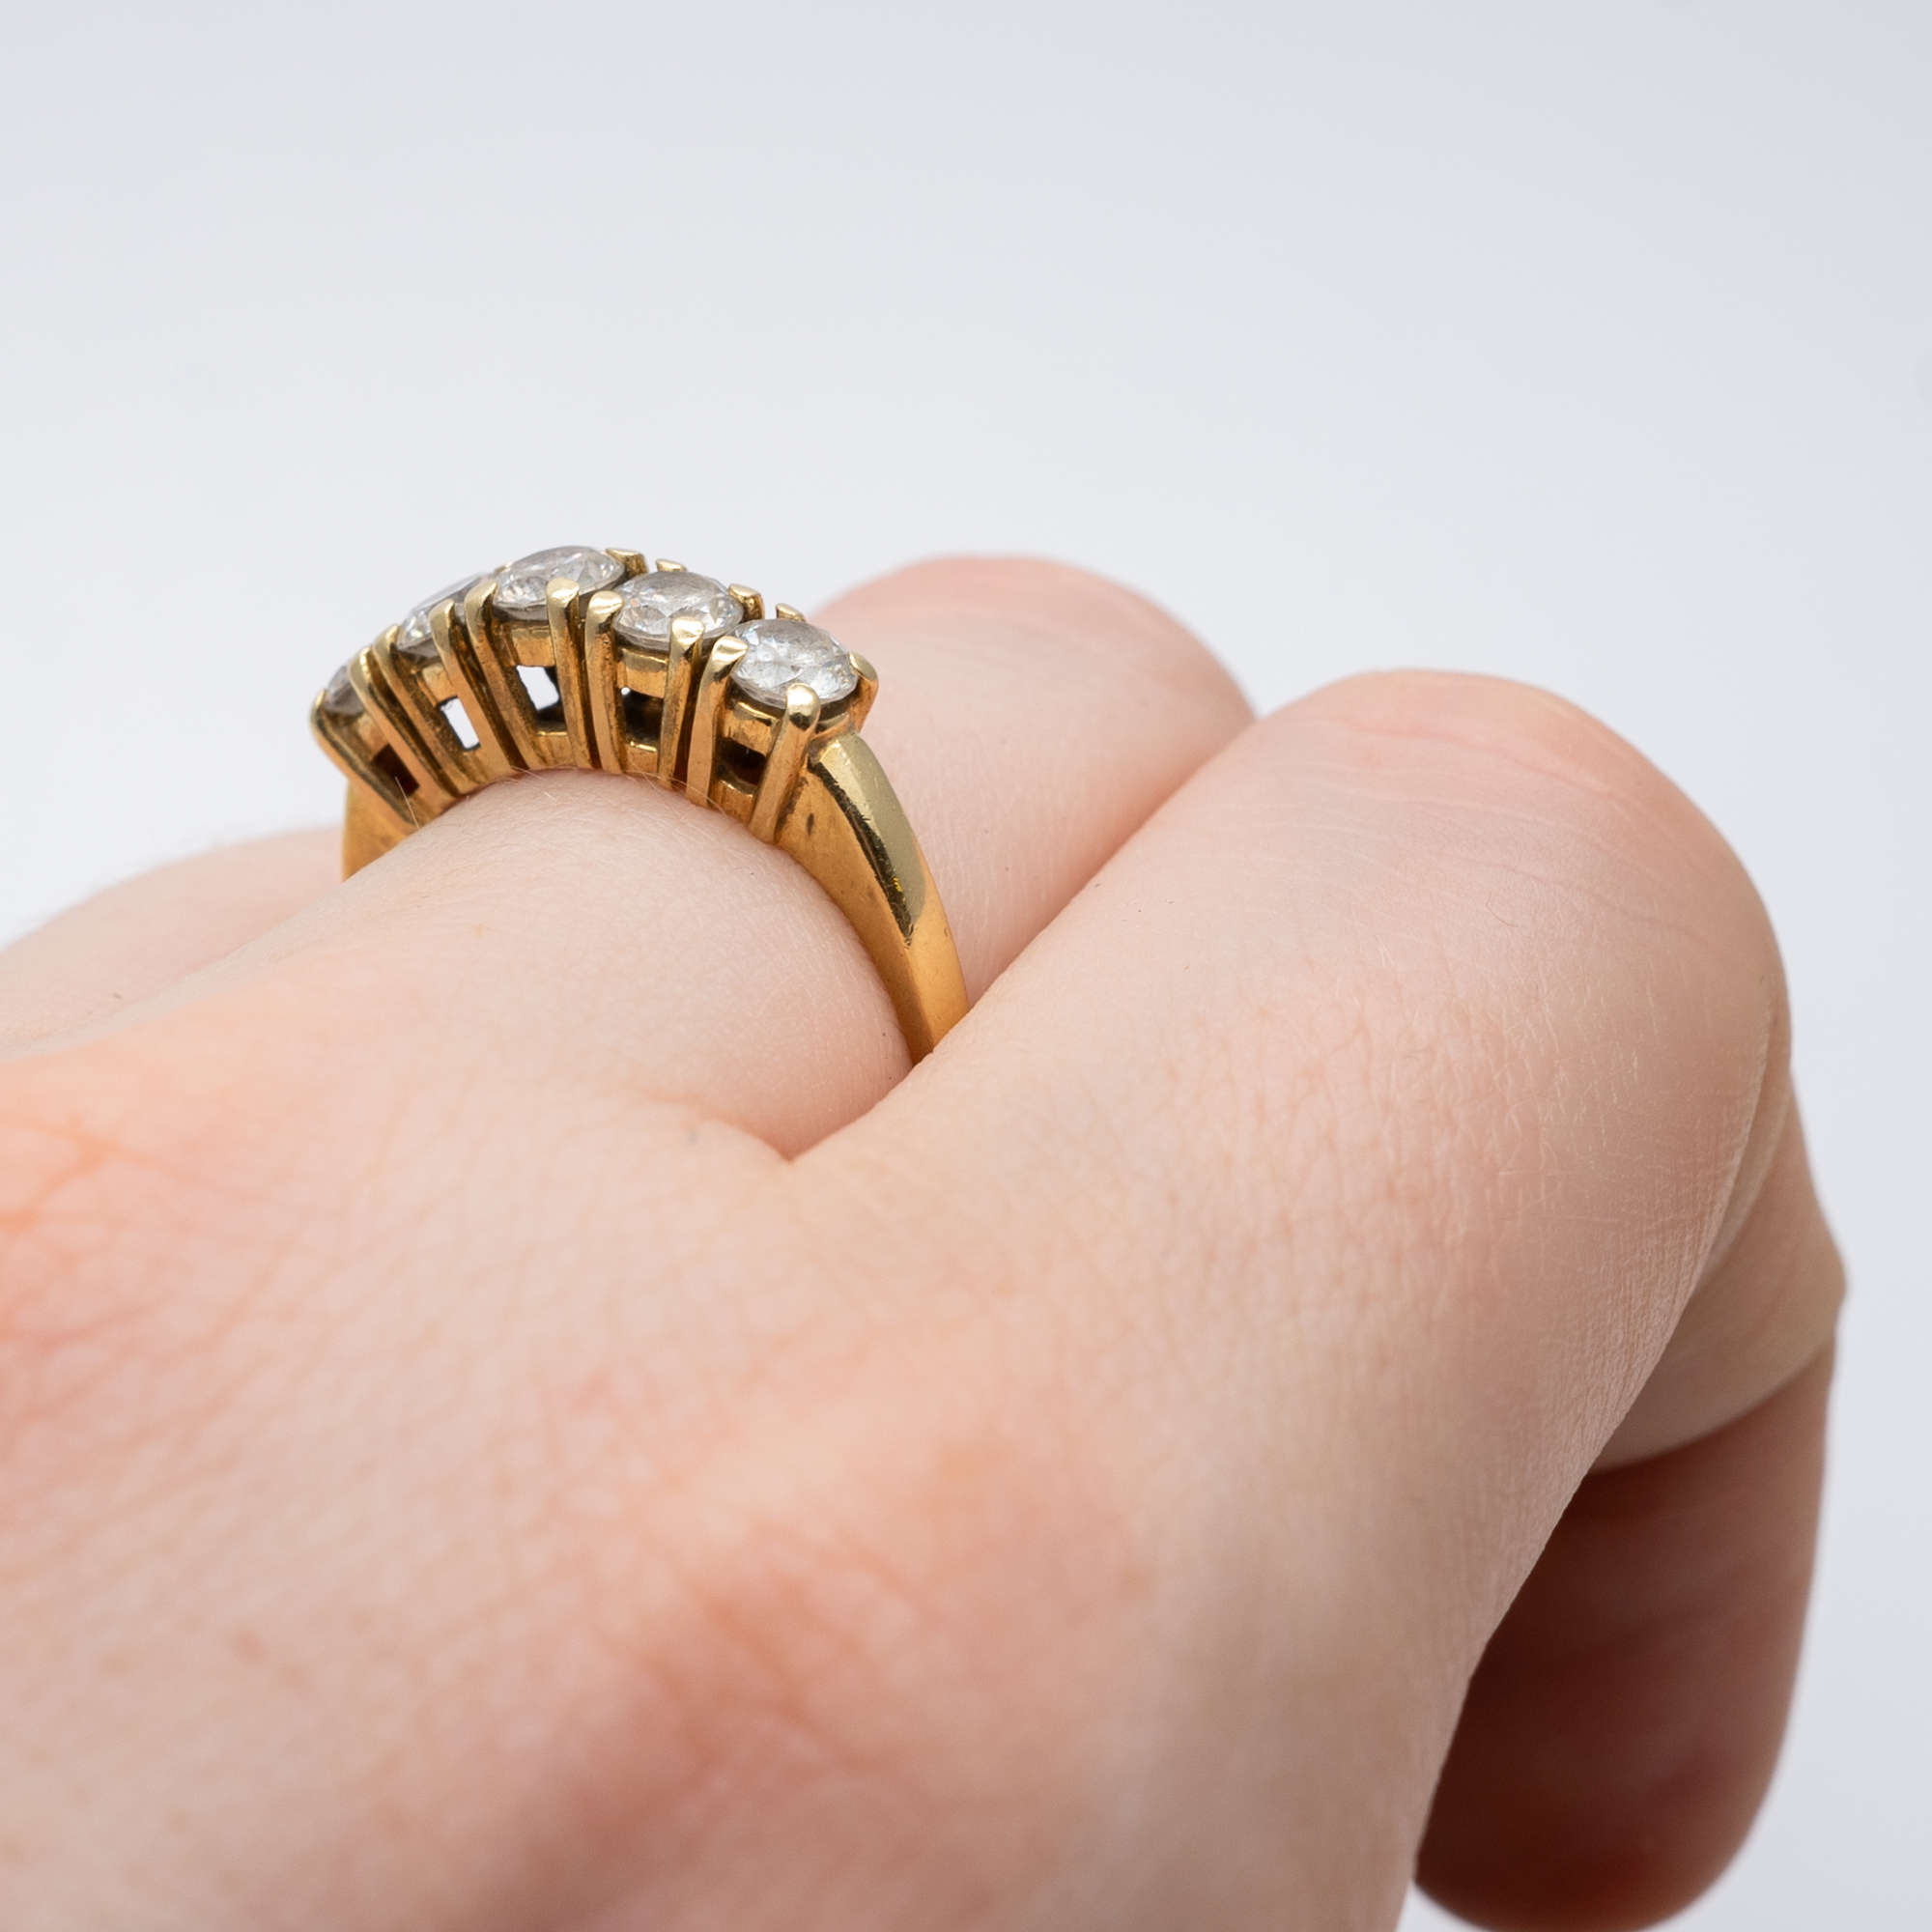 A 14ct yellow gold cz set eternity ring - Image 5 of 6